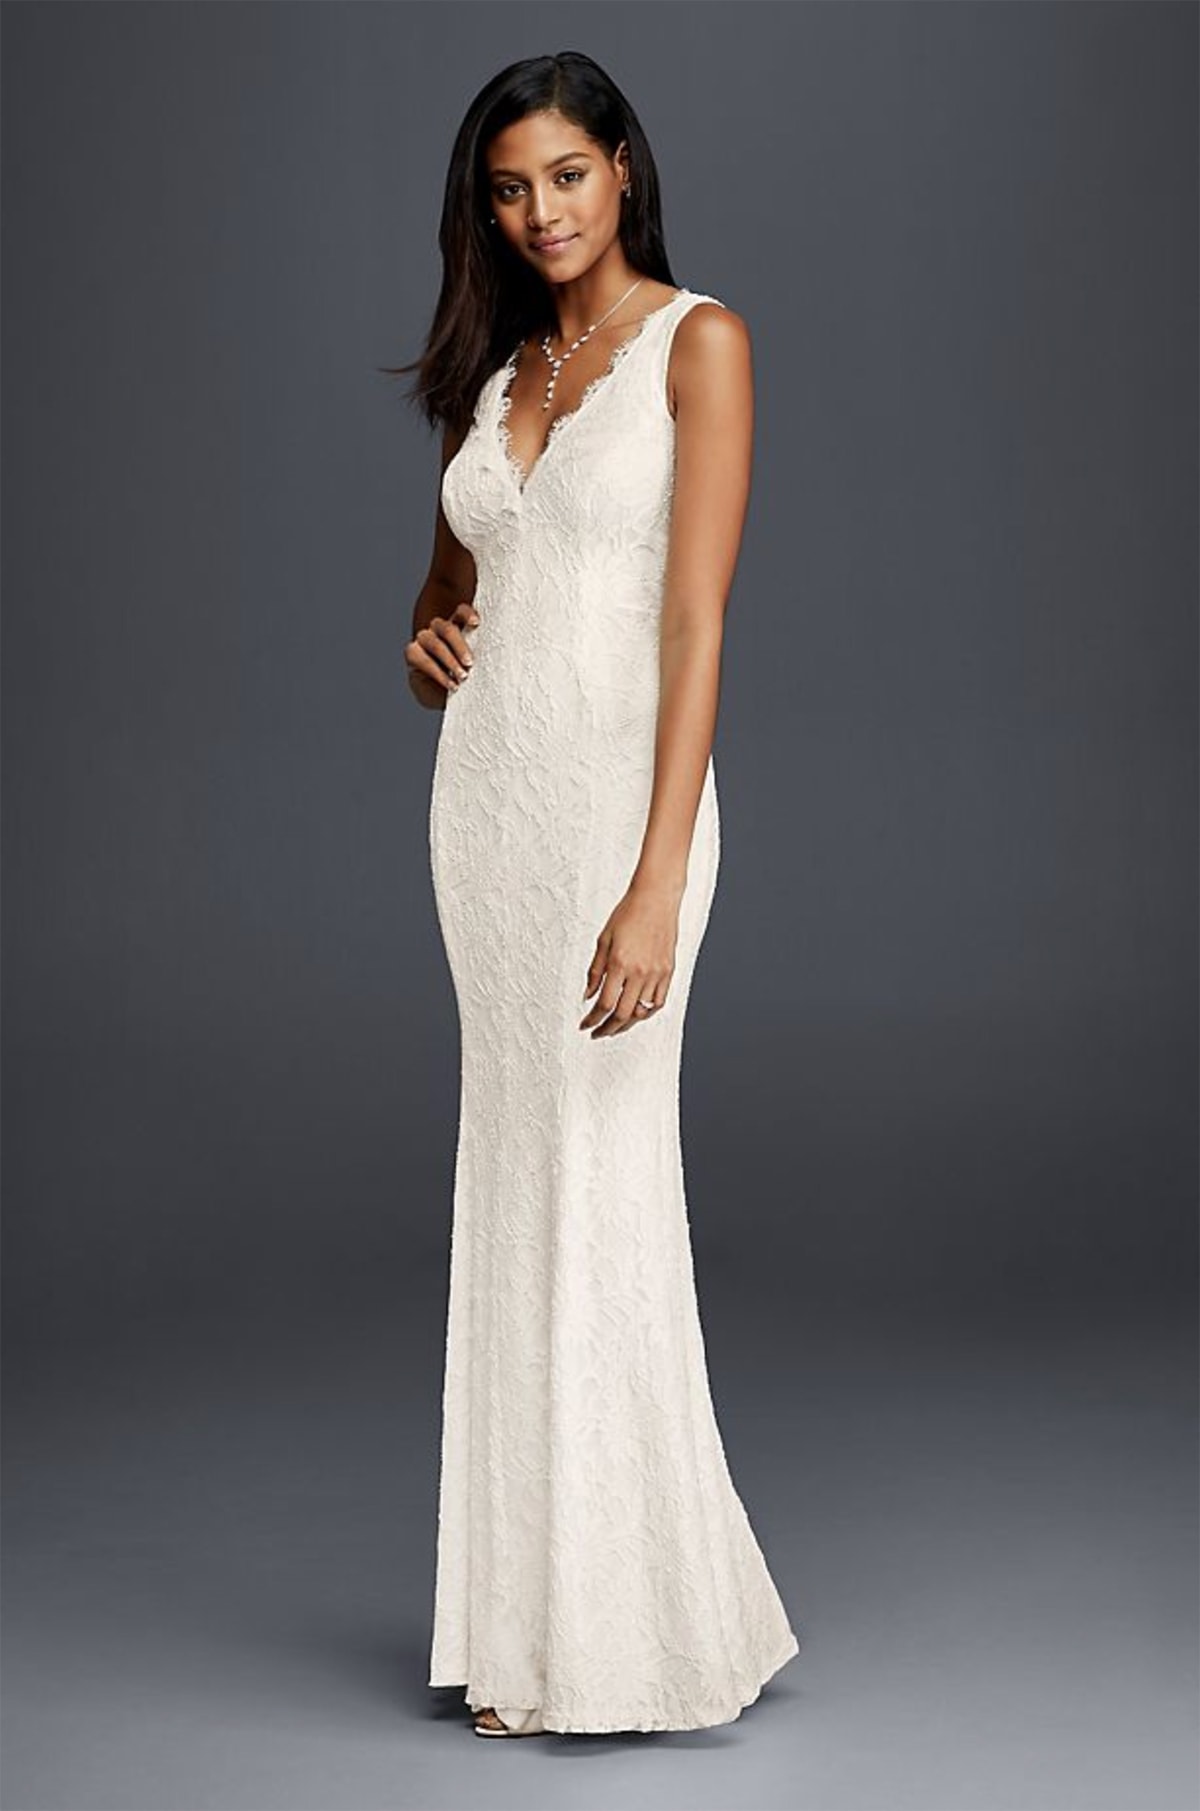 Plunging V-Neck Ruffle Strap Low Back Crepe Gown